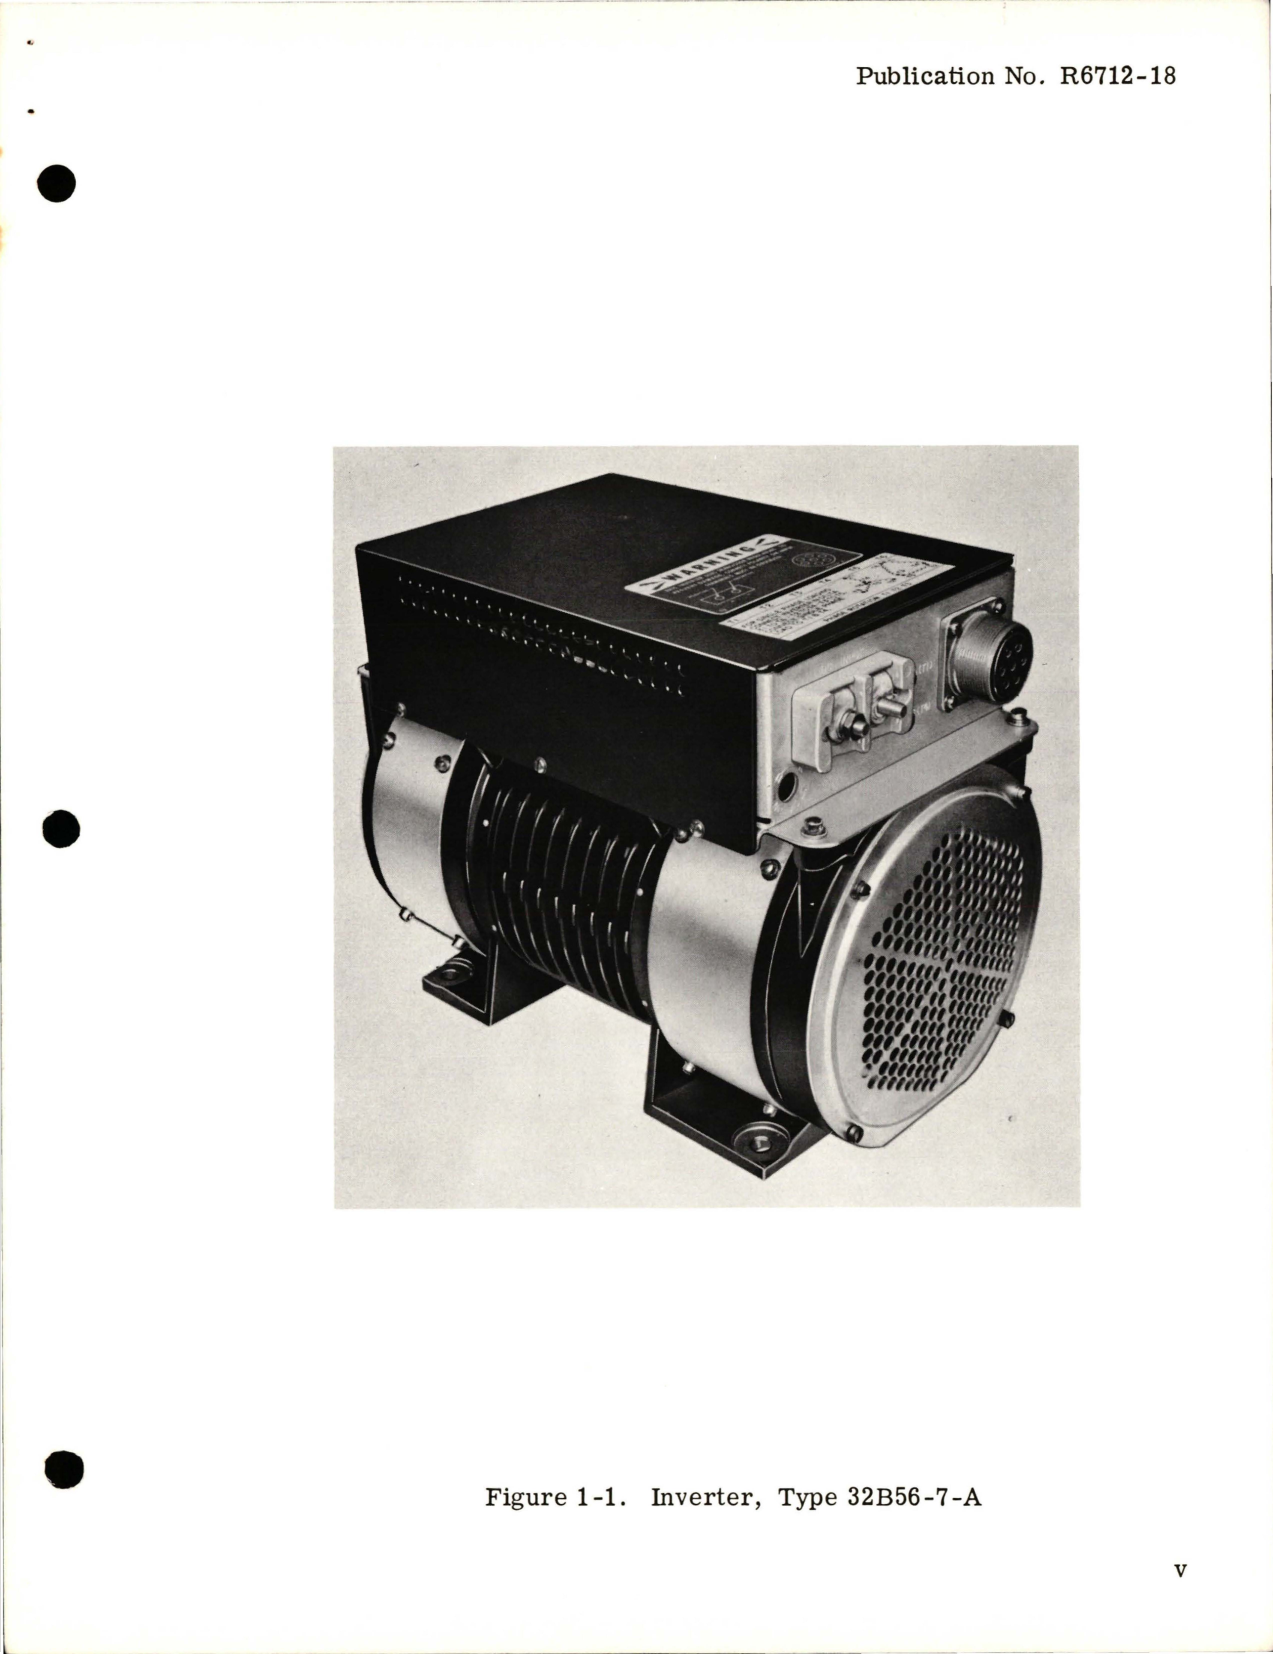 Sample page 7 from AirCorps Library document: Maintenance Instructions with Illustrated Parts List for Inverter - Type 32B56-7-A and 32B56-11-A